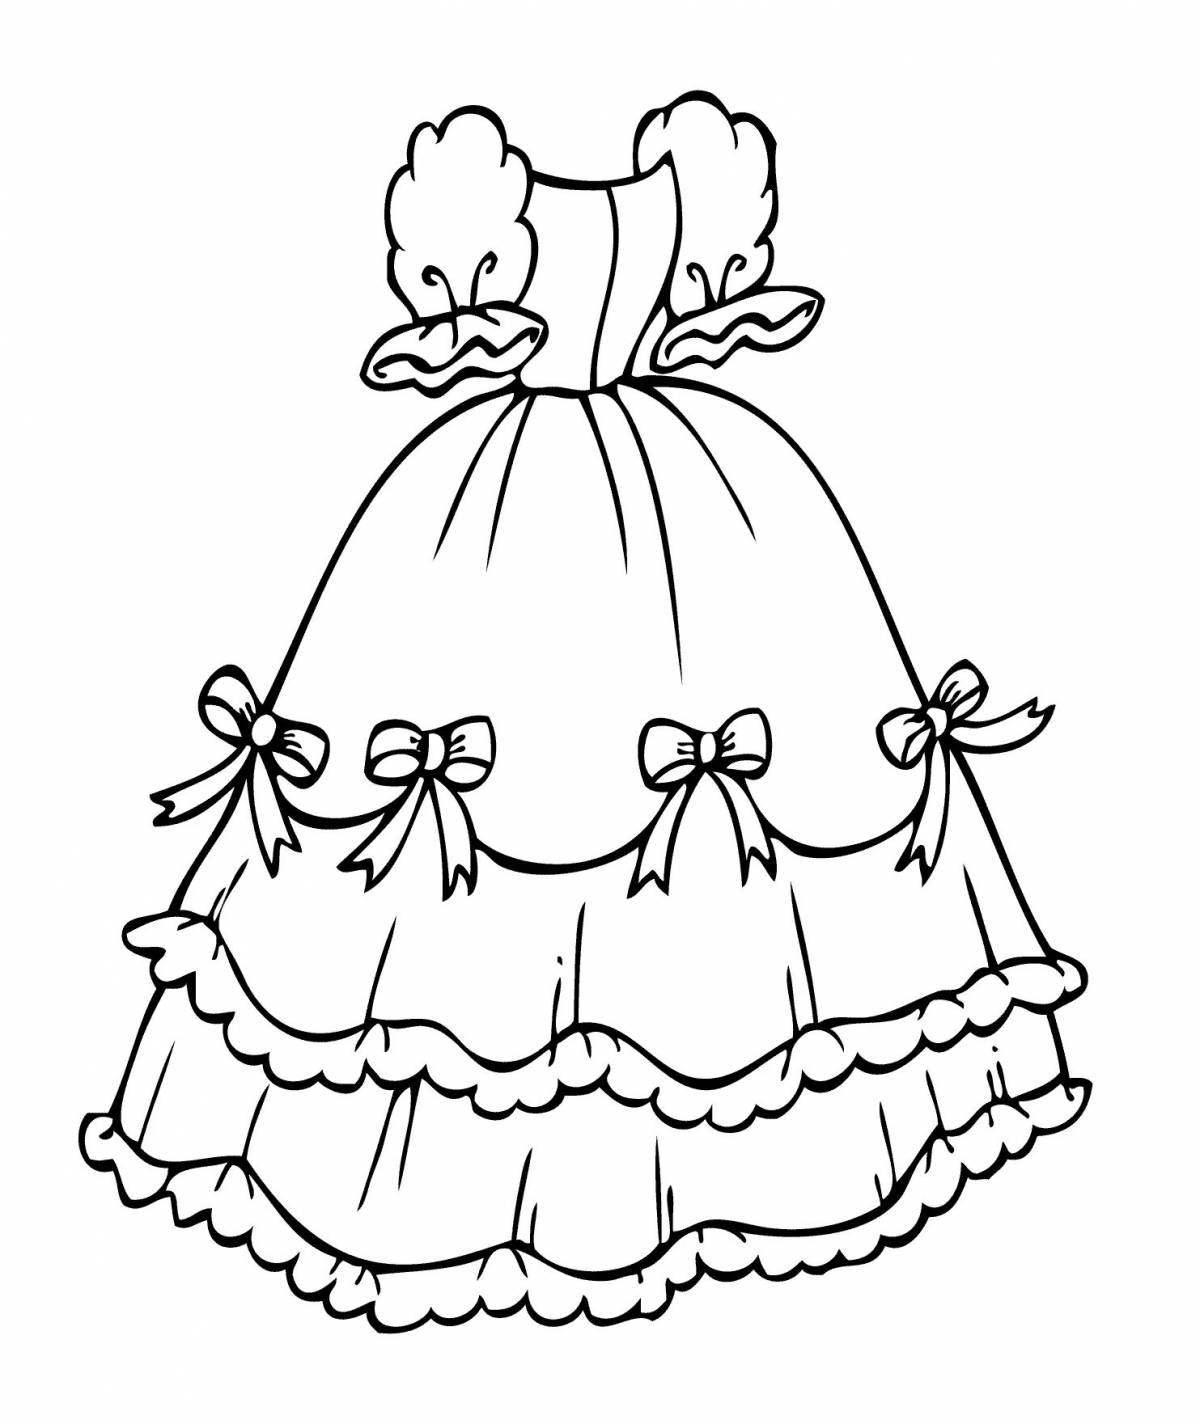 Coloring page playful doll dress for children 3-4 years old